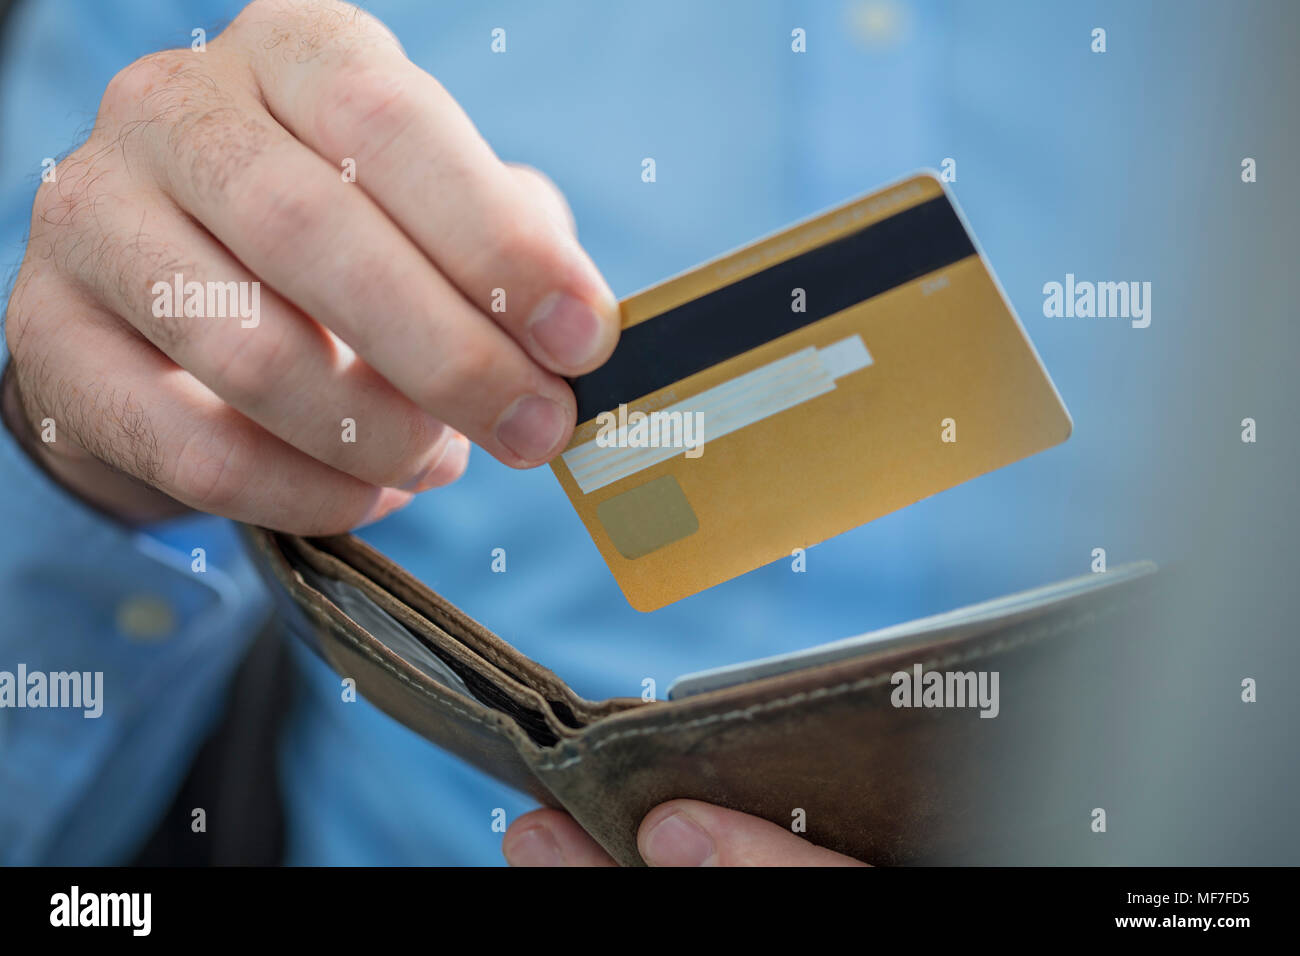 Man's hands holding credit card and purse, close-up Stock Photo